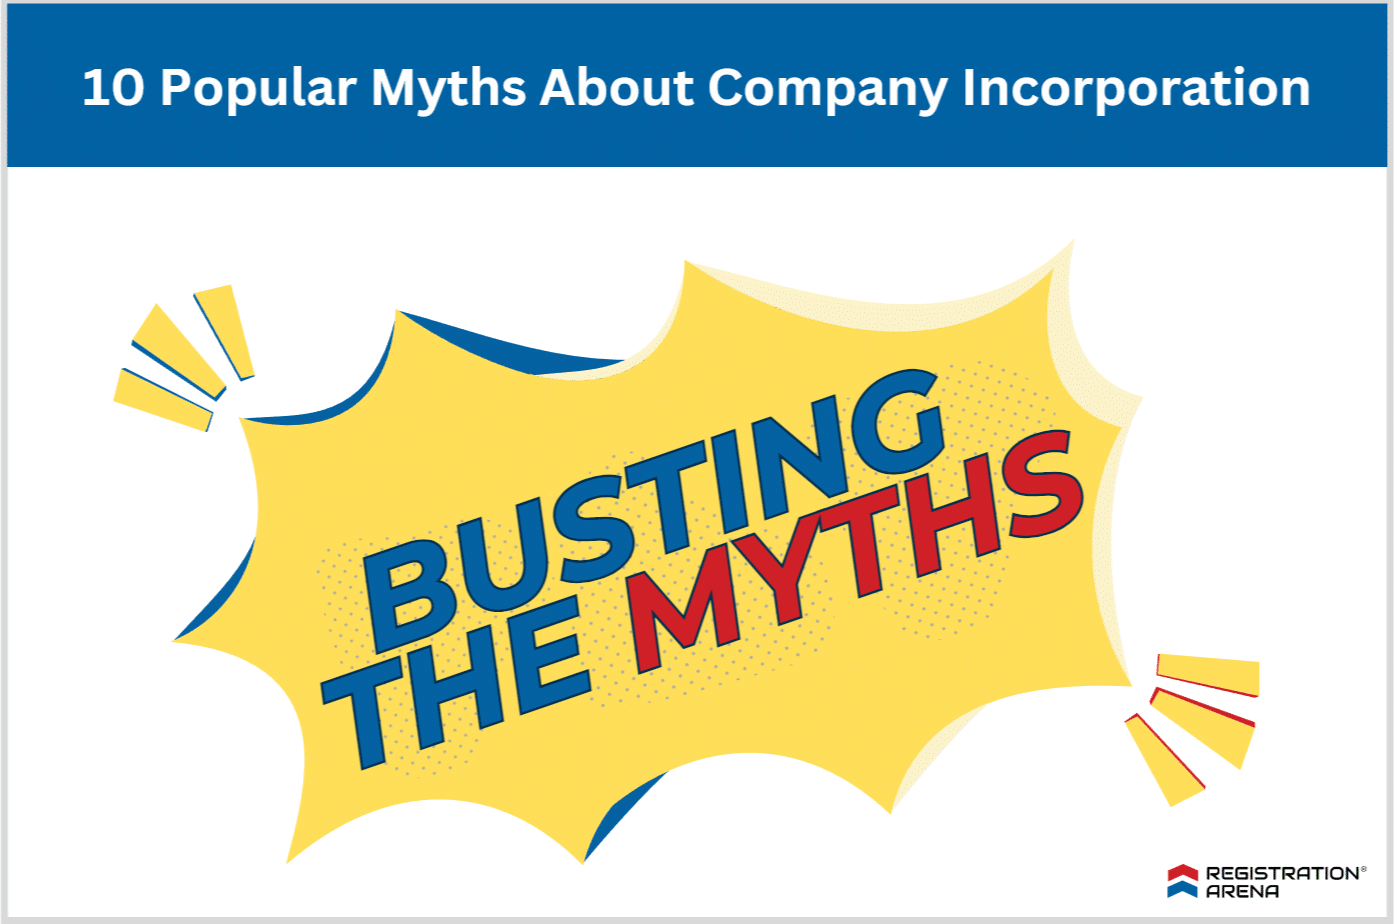 10 popular Myths about company incorporation